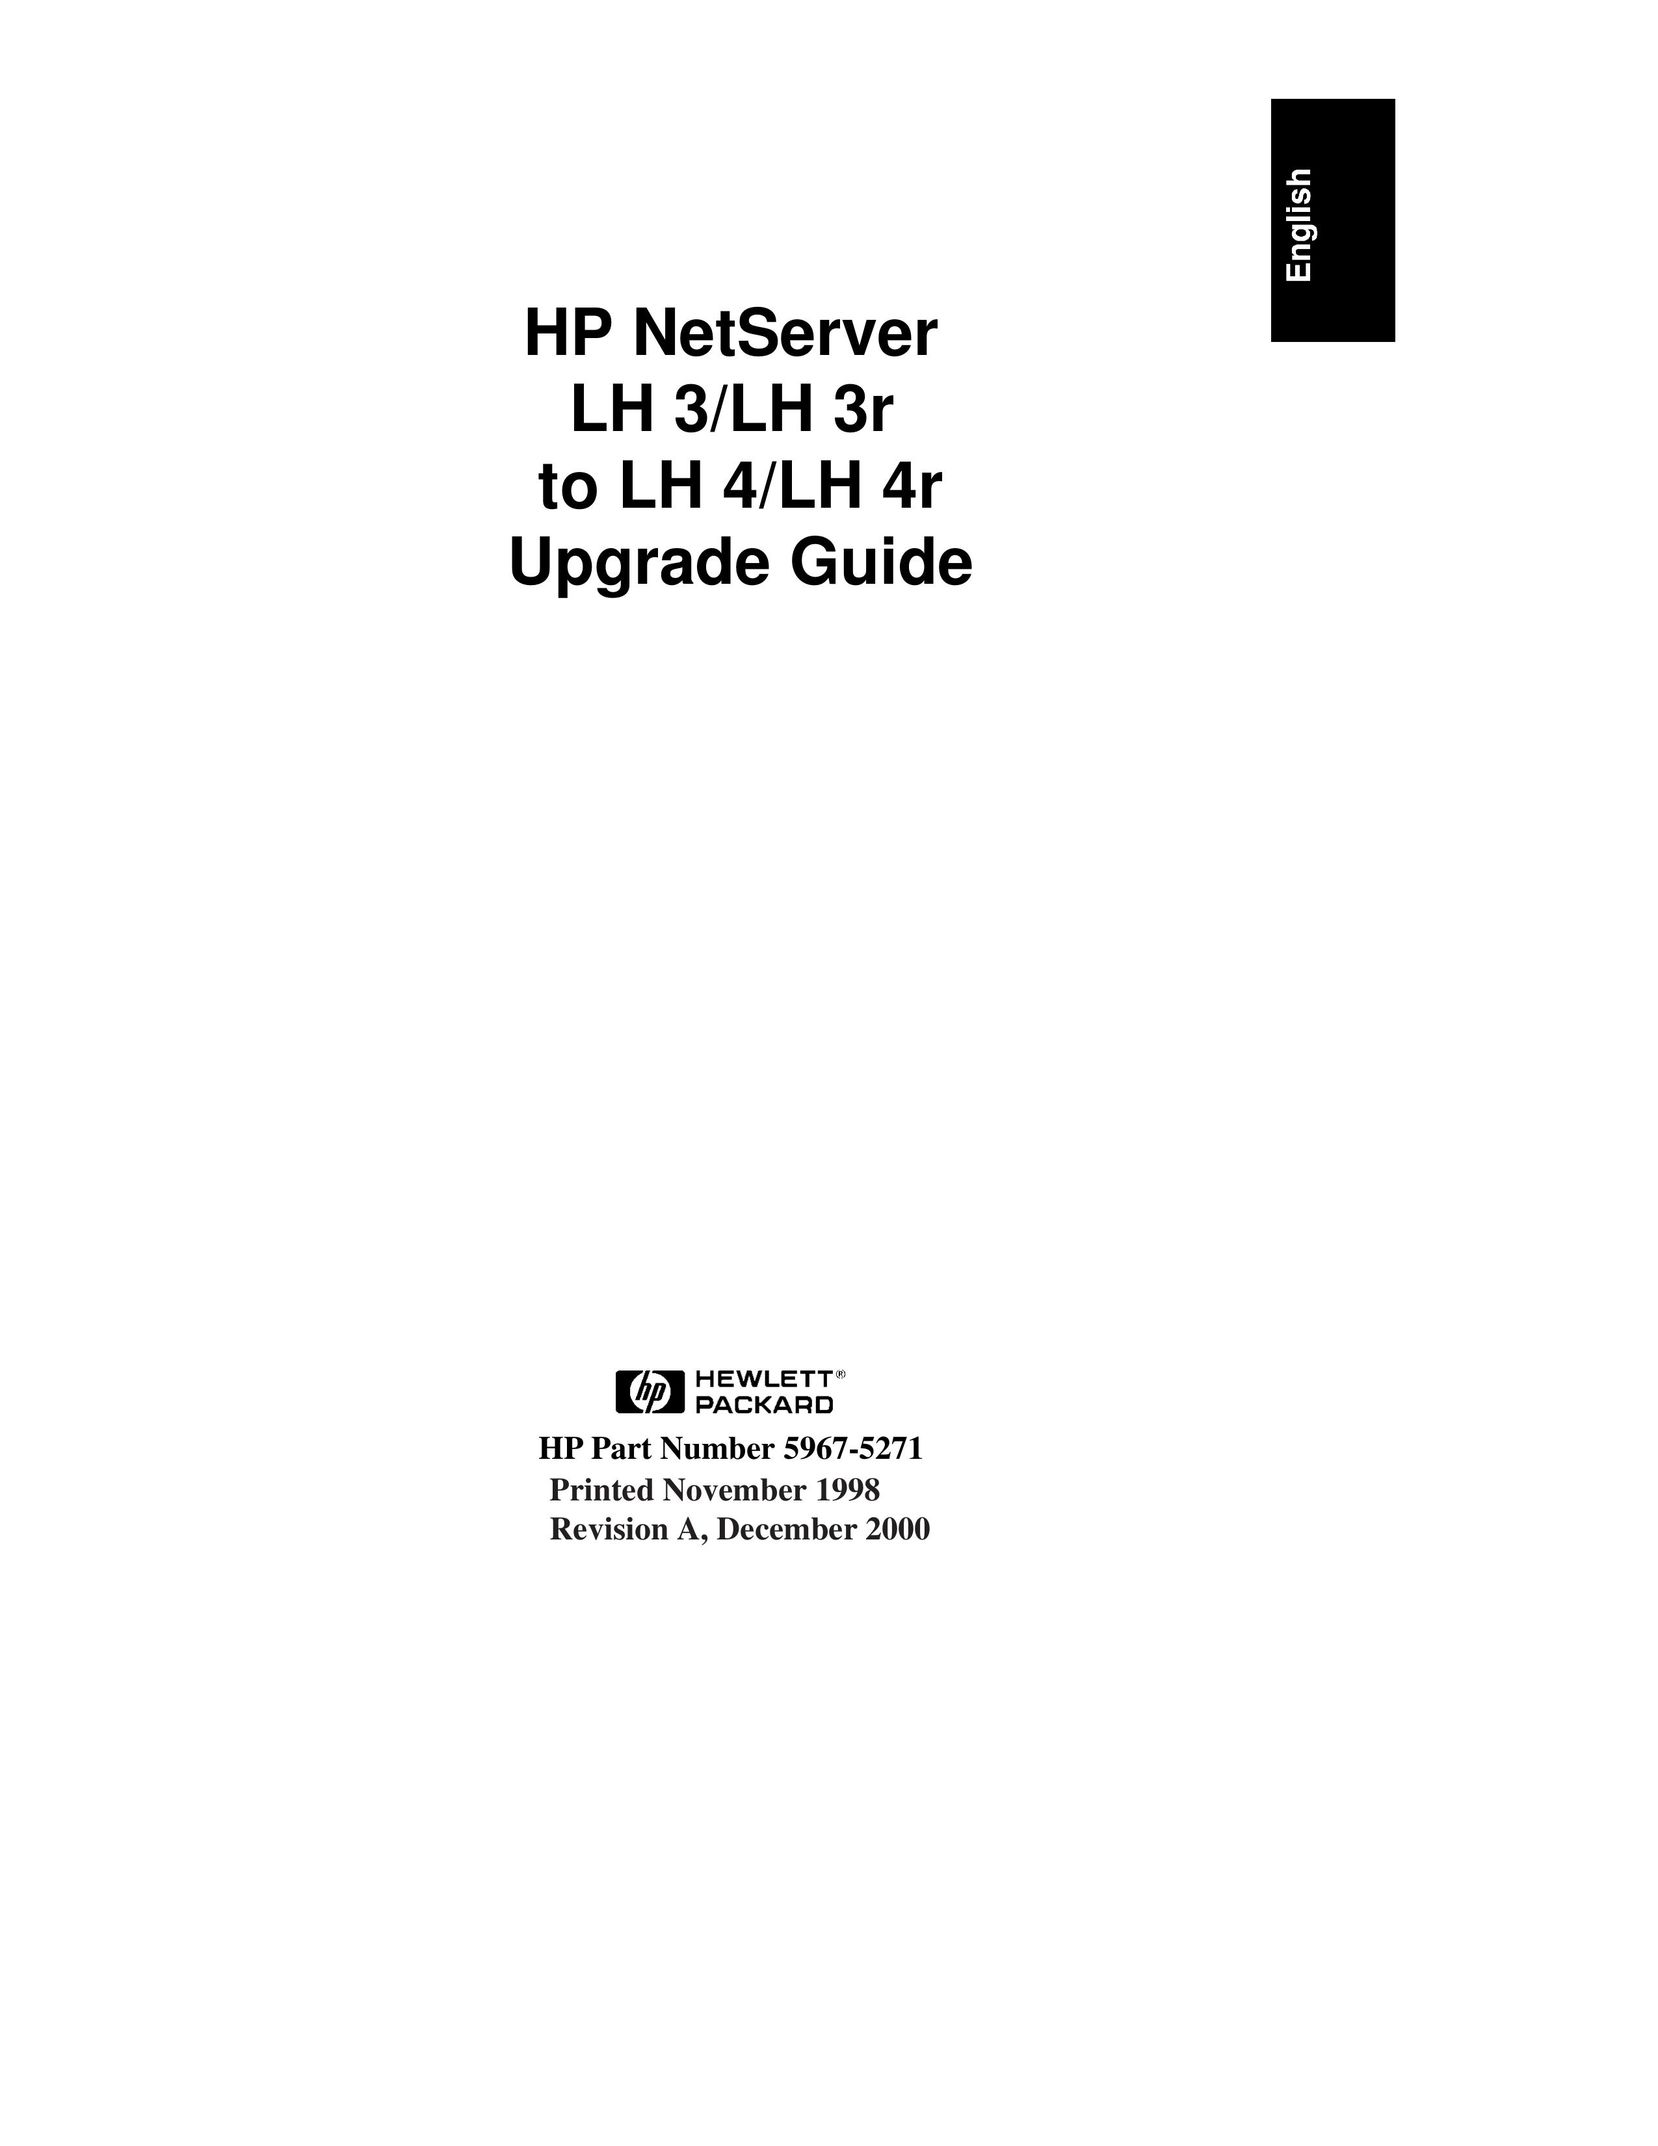 HP (Hewlett-Packard) LH 3r Network Cables User Manual